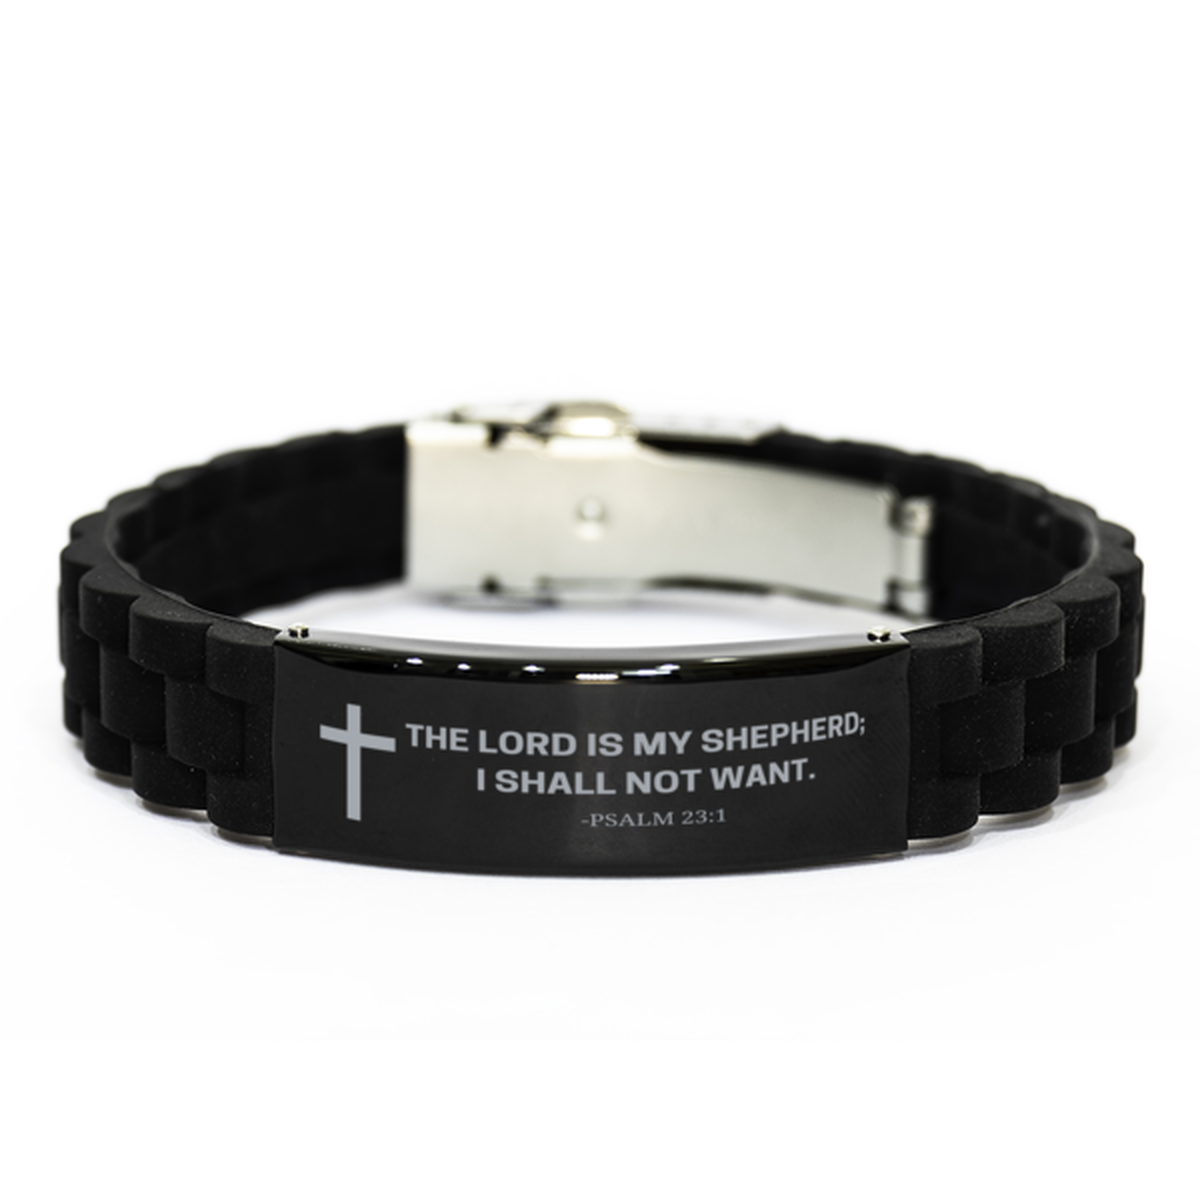 Baptism Gifts For Teenage Boys Girls, Christian Bible Verse Black Glidelock Clasp Bracelet, The Lord is my shepherd, Catholic Confirmation Gifts for Son, Godson, Grandson, Nephew